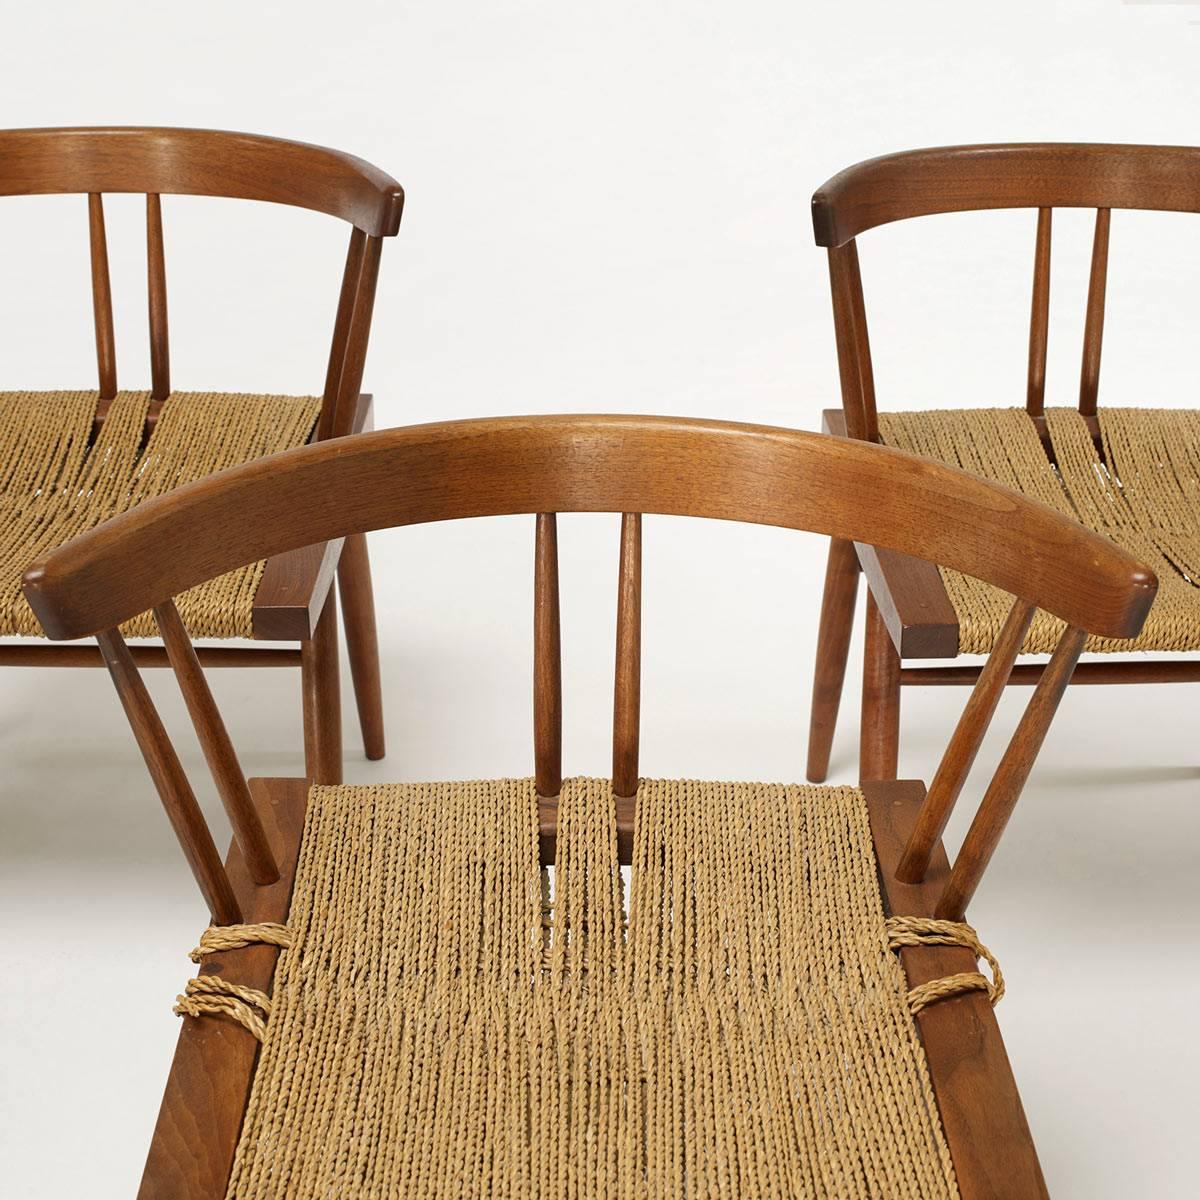 George Nakashima grass cord seat chairs with walnut frames. New Hope, PA, circa 1967.
Seats re-roped. Dark patina to likely original finish. Good condition.
Sold with a letter of authenticity issued by
Mira Nakashima.